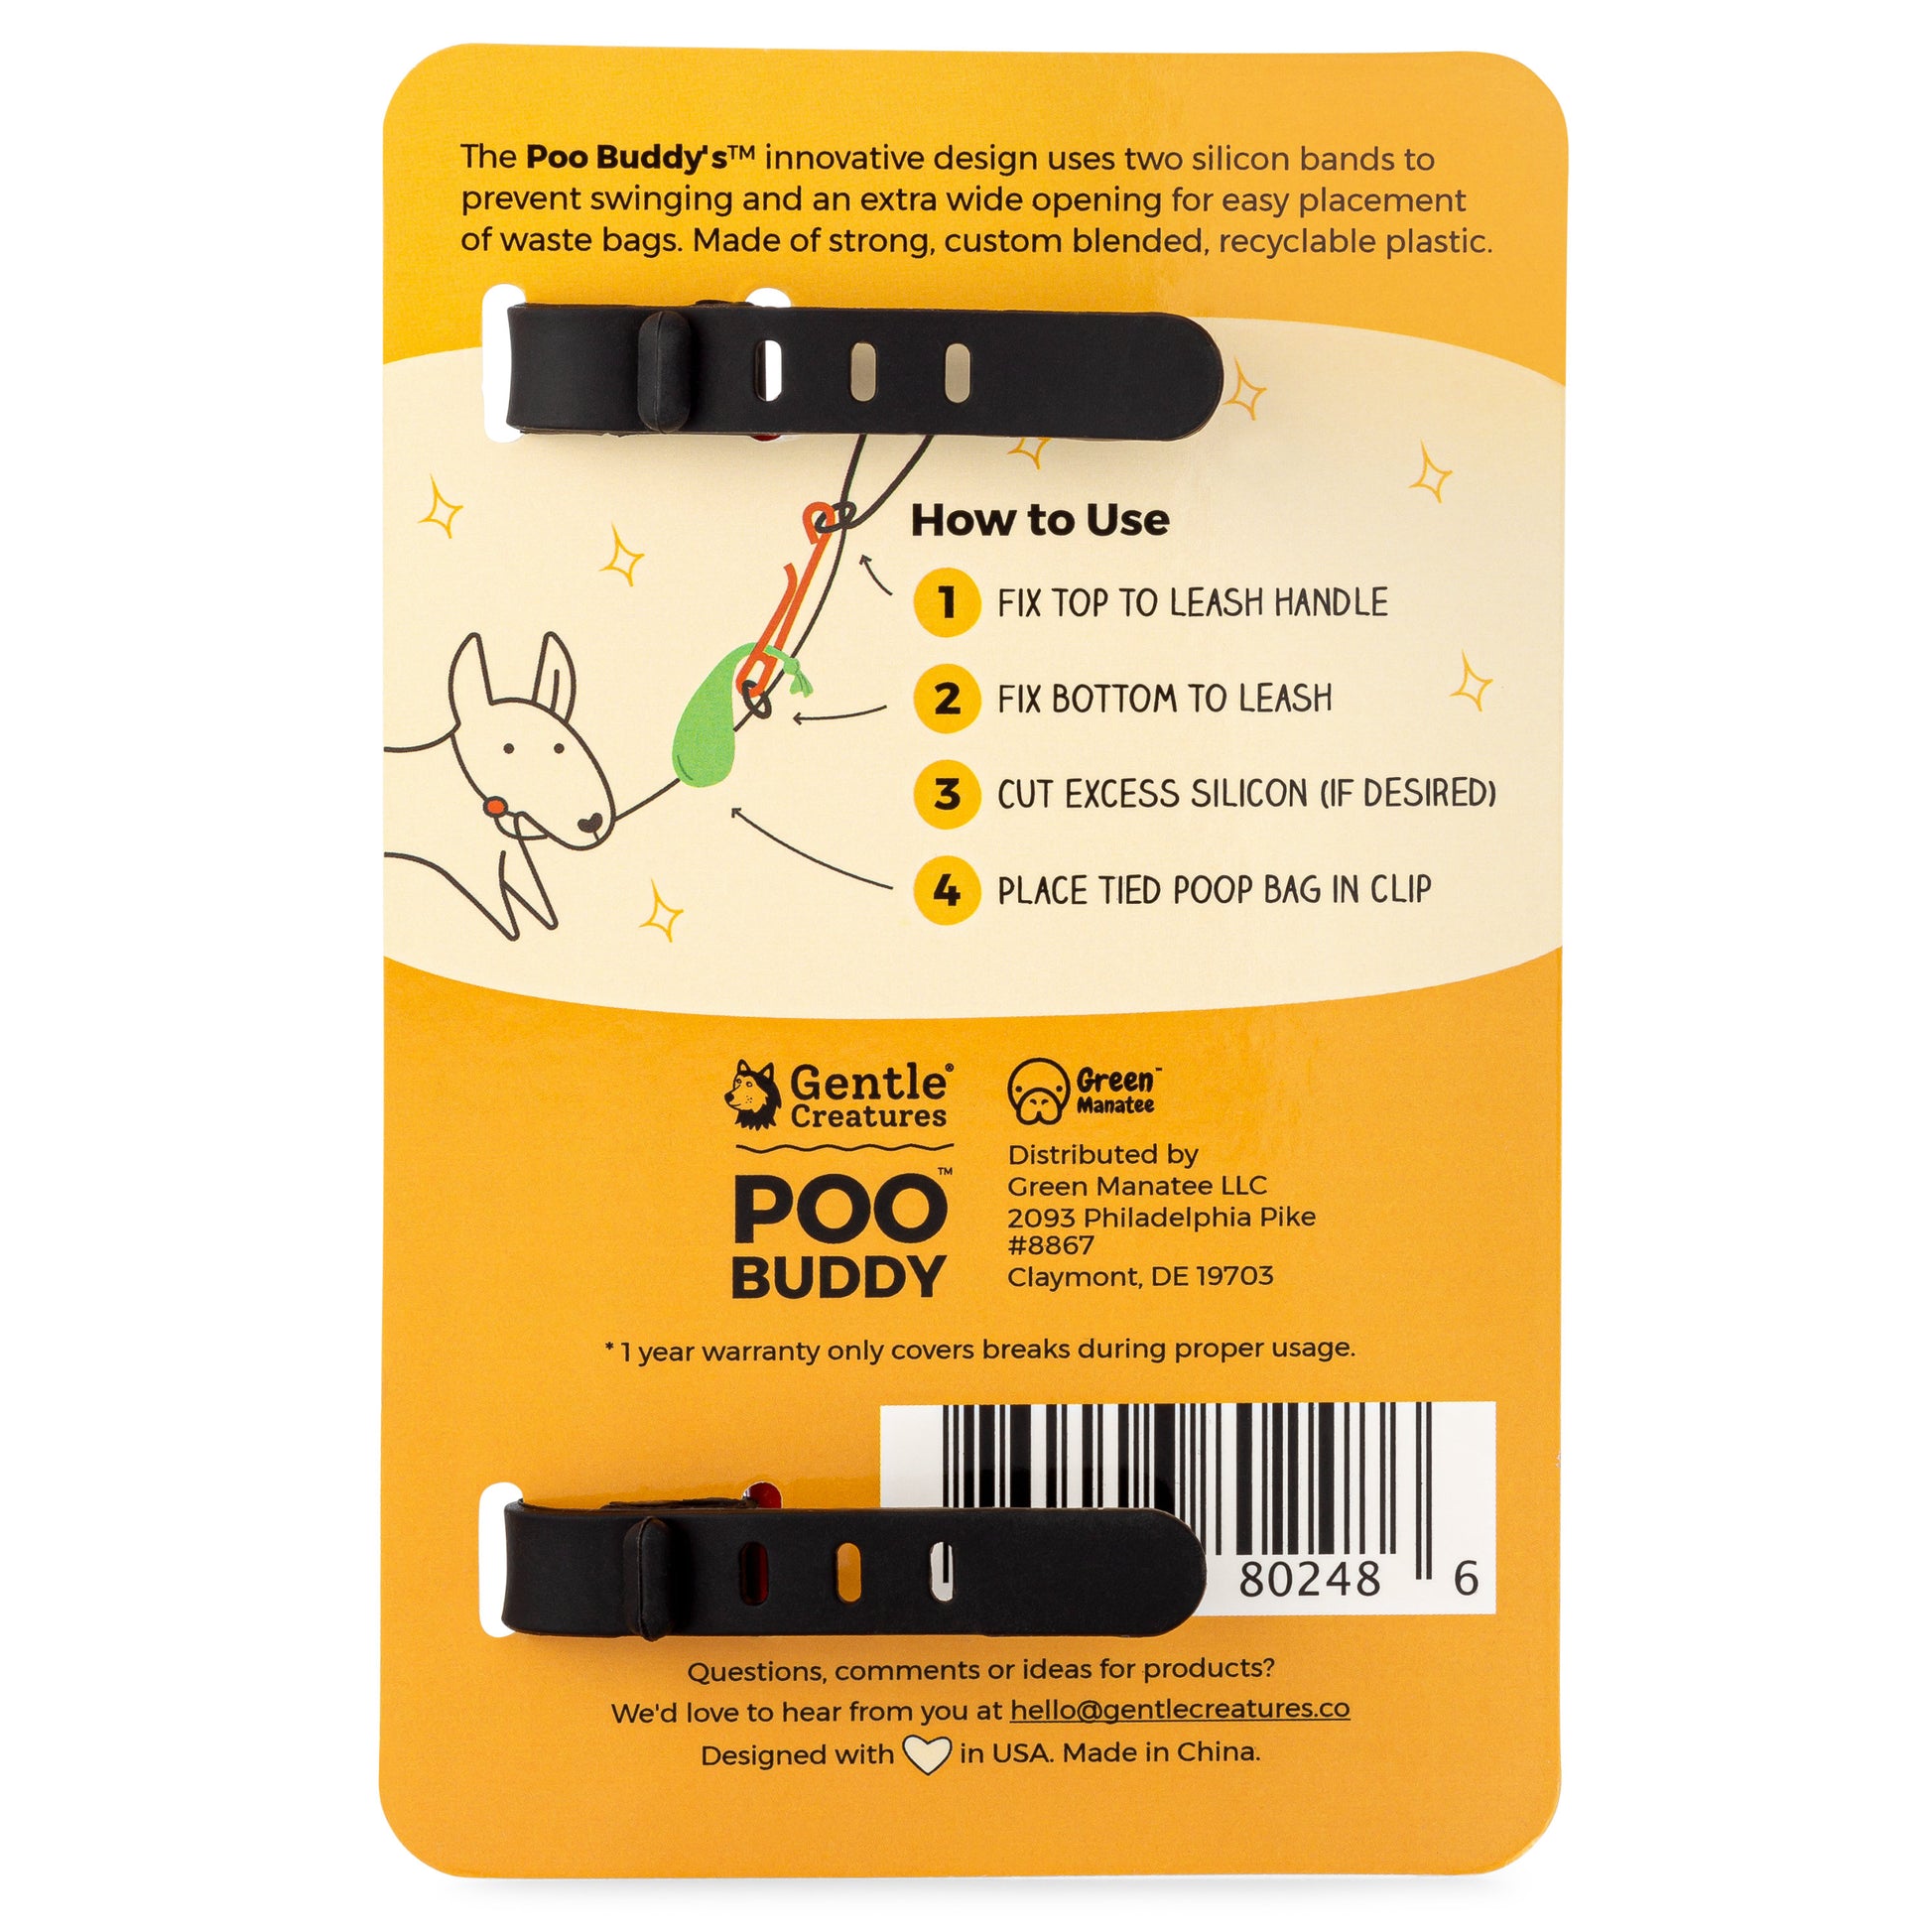 The Poo Buddy's™ innovative design uses two silicon bands to prevent swinging and an extra wide opening for easy placement of waste bags. Made of strong, custom blended, recyclable plastic.